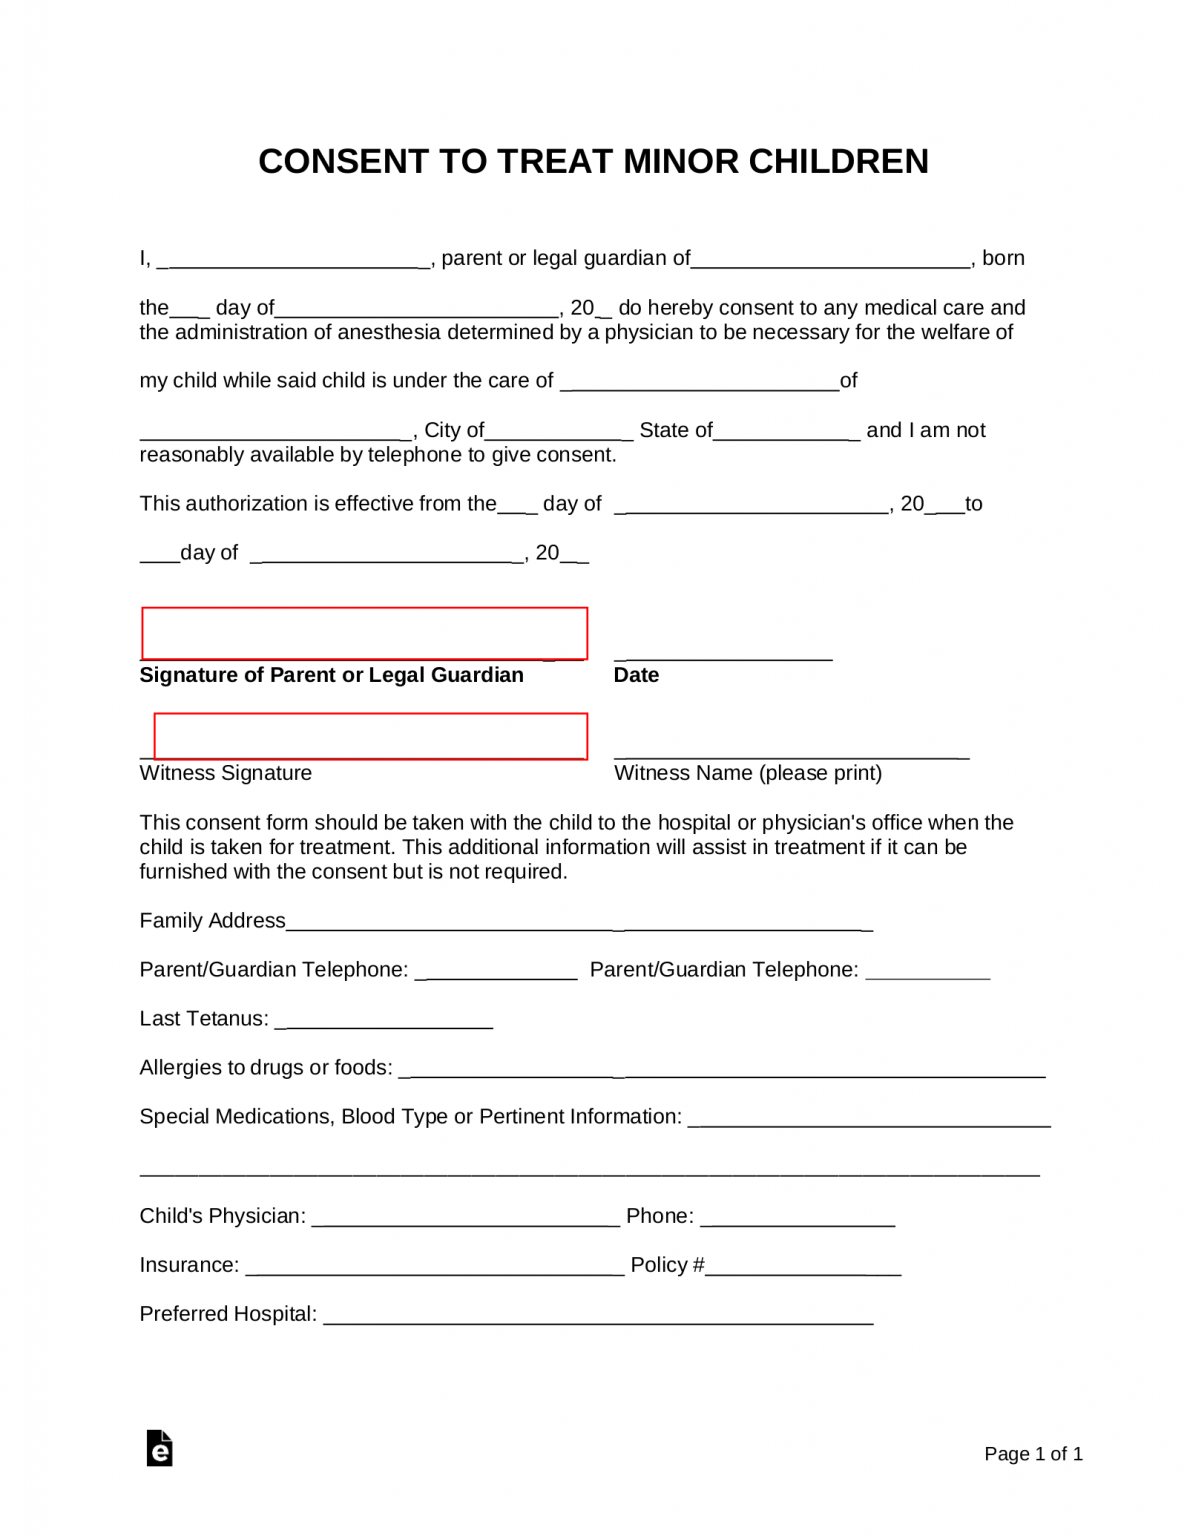 travel consent form for minor pdf canada